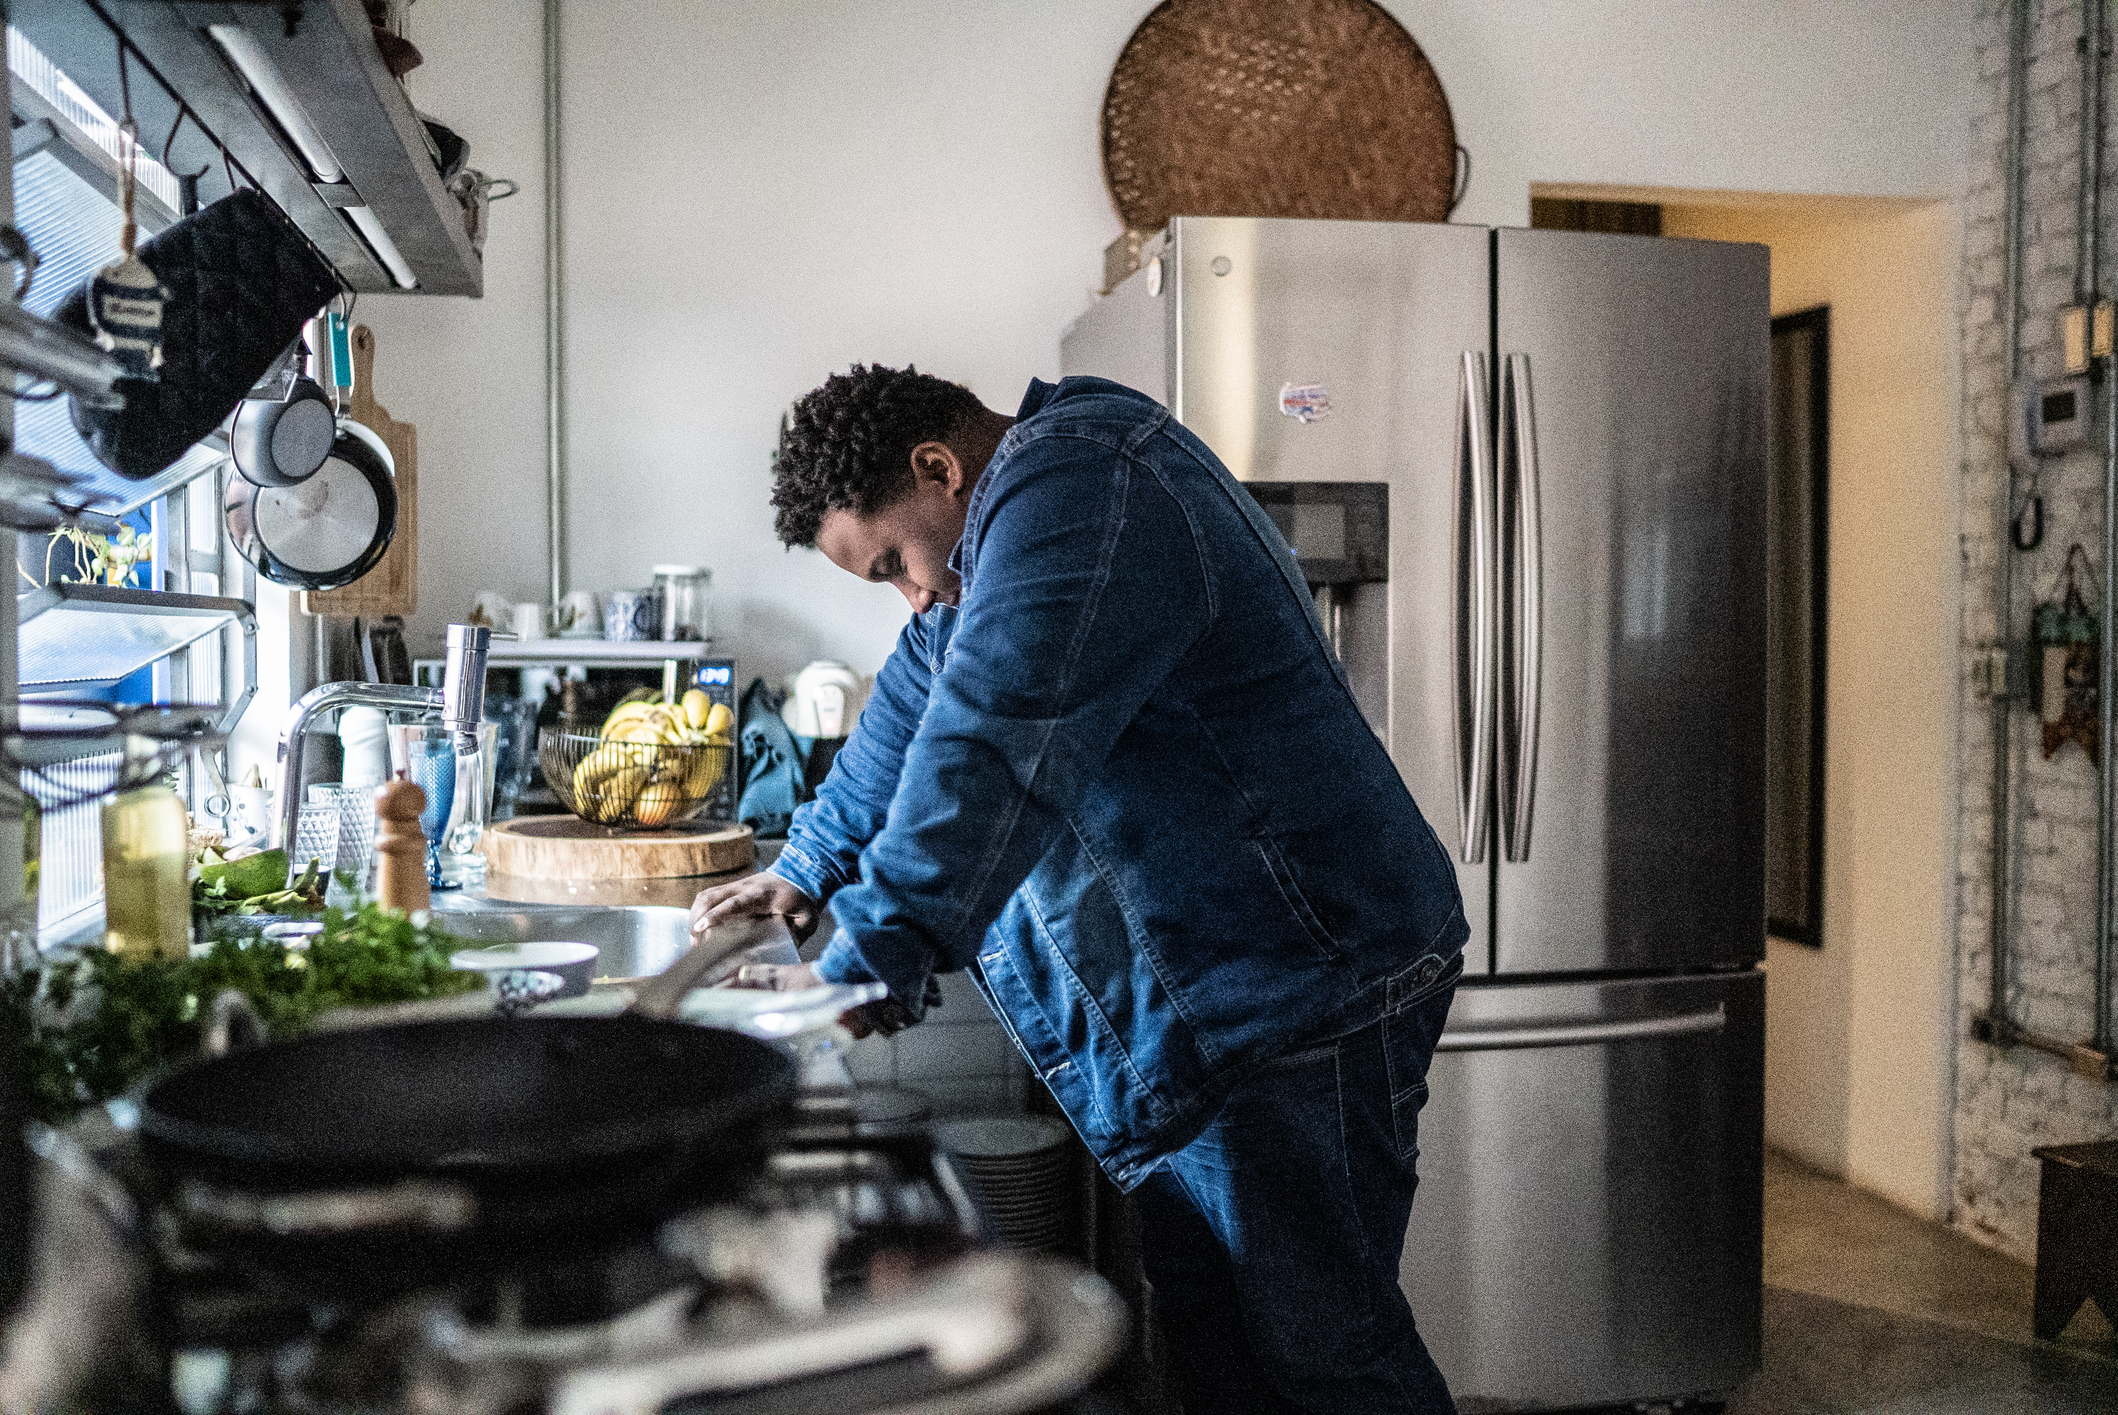 A Black man wearing jeans and a denim jacket braces himself against his kitchen counter at home, squeezing his eyes shut while he tries to calm down